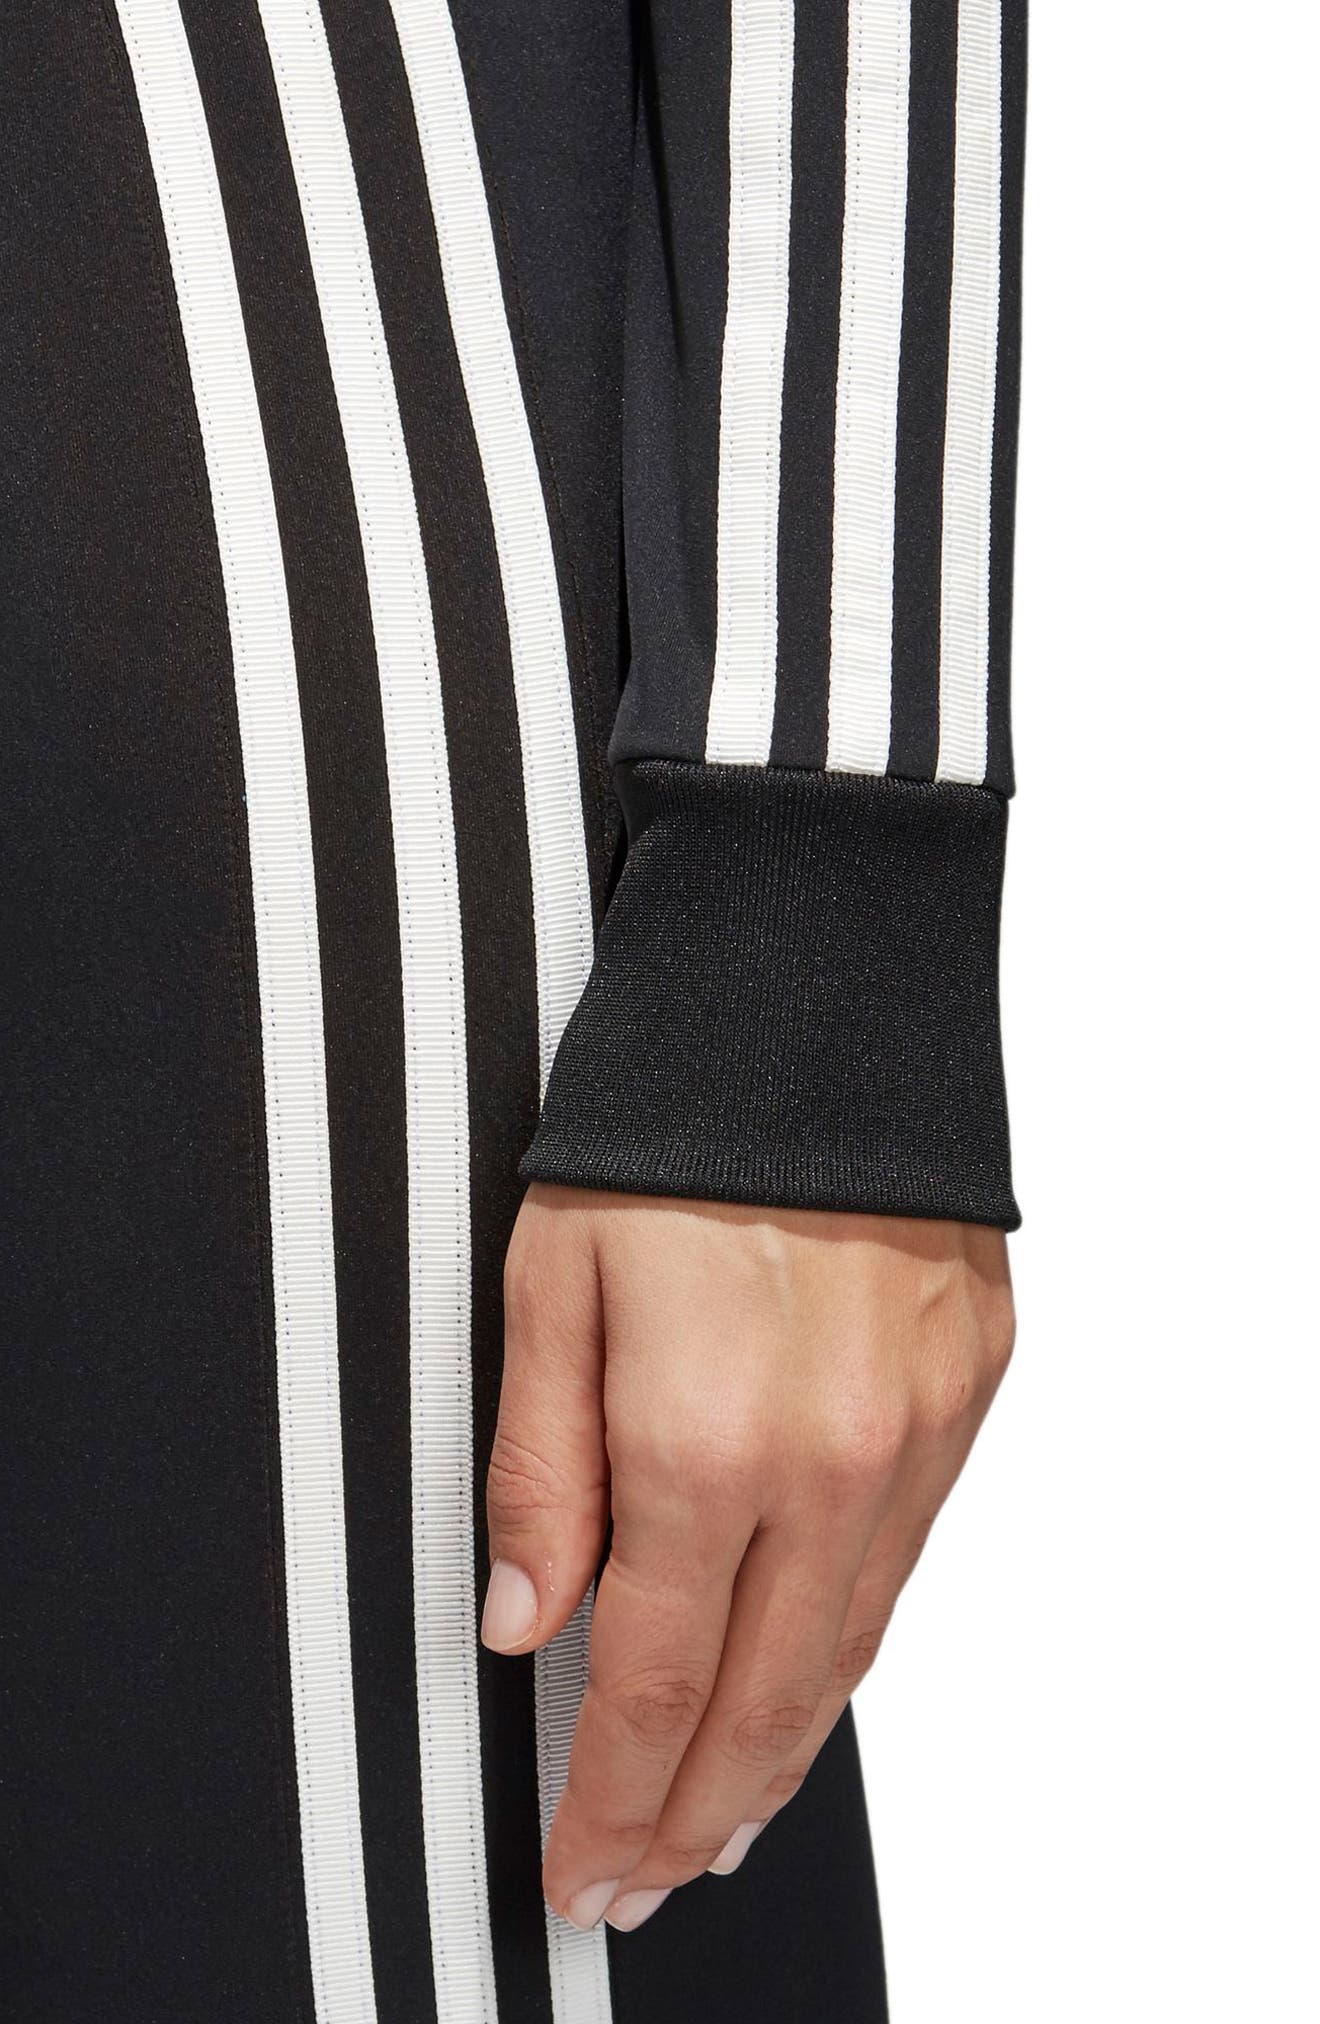 adidas stage one piece tracksuit